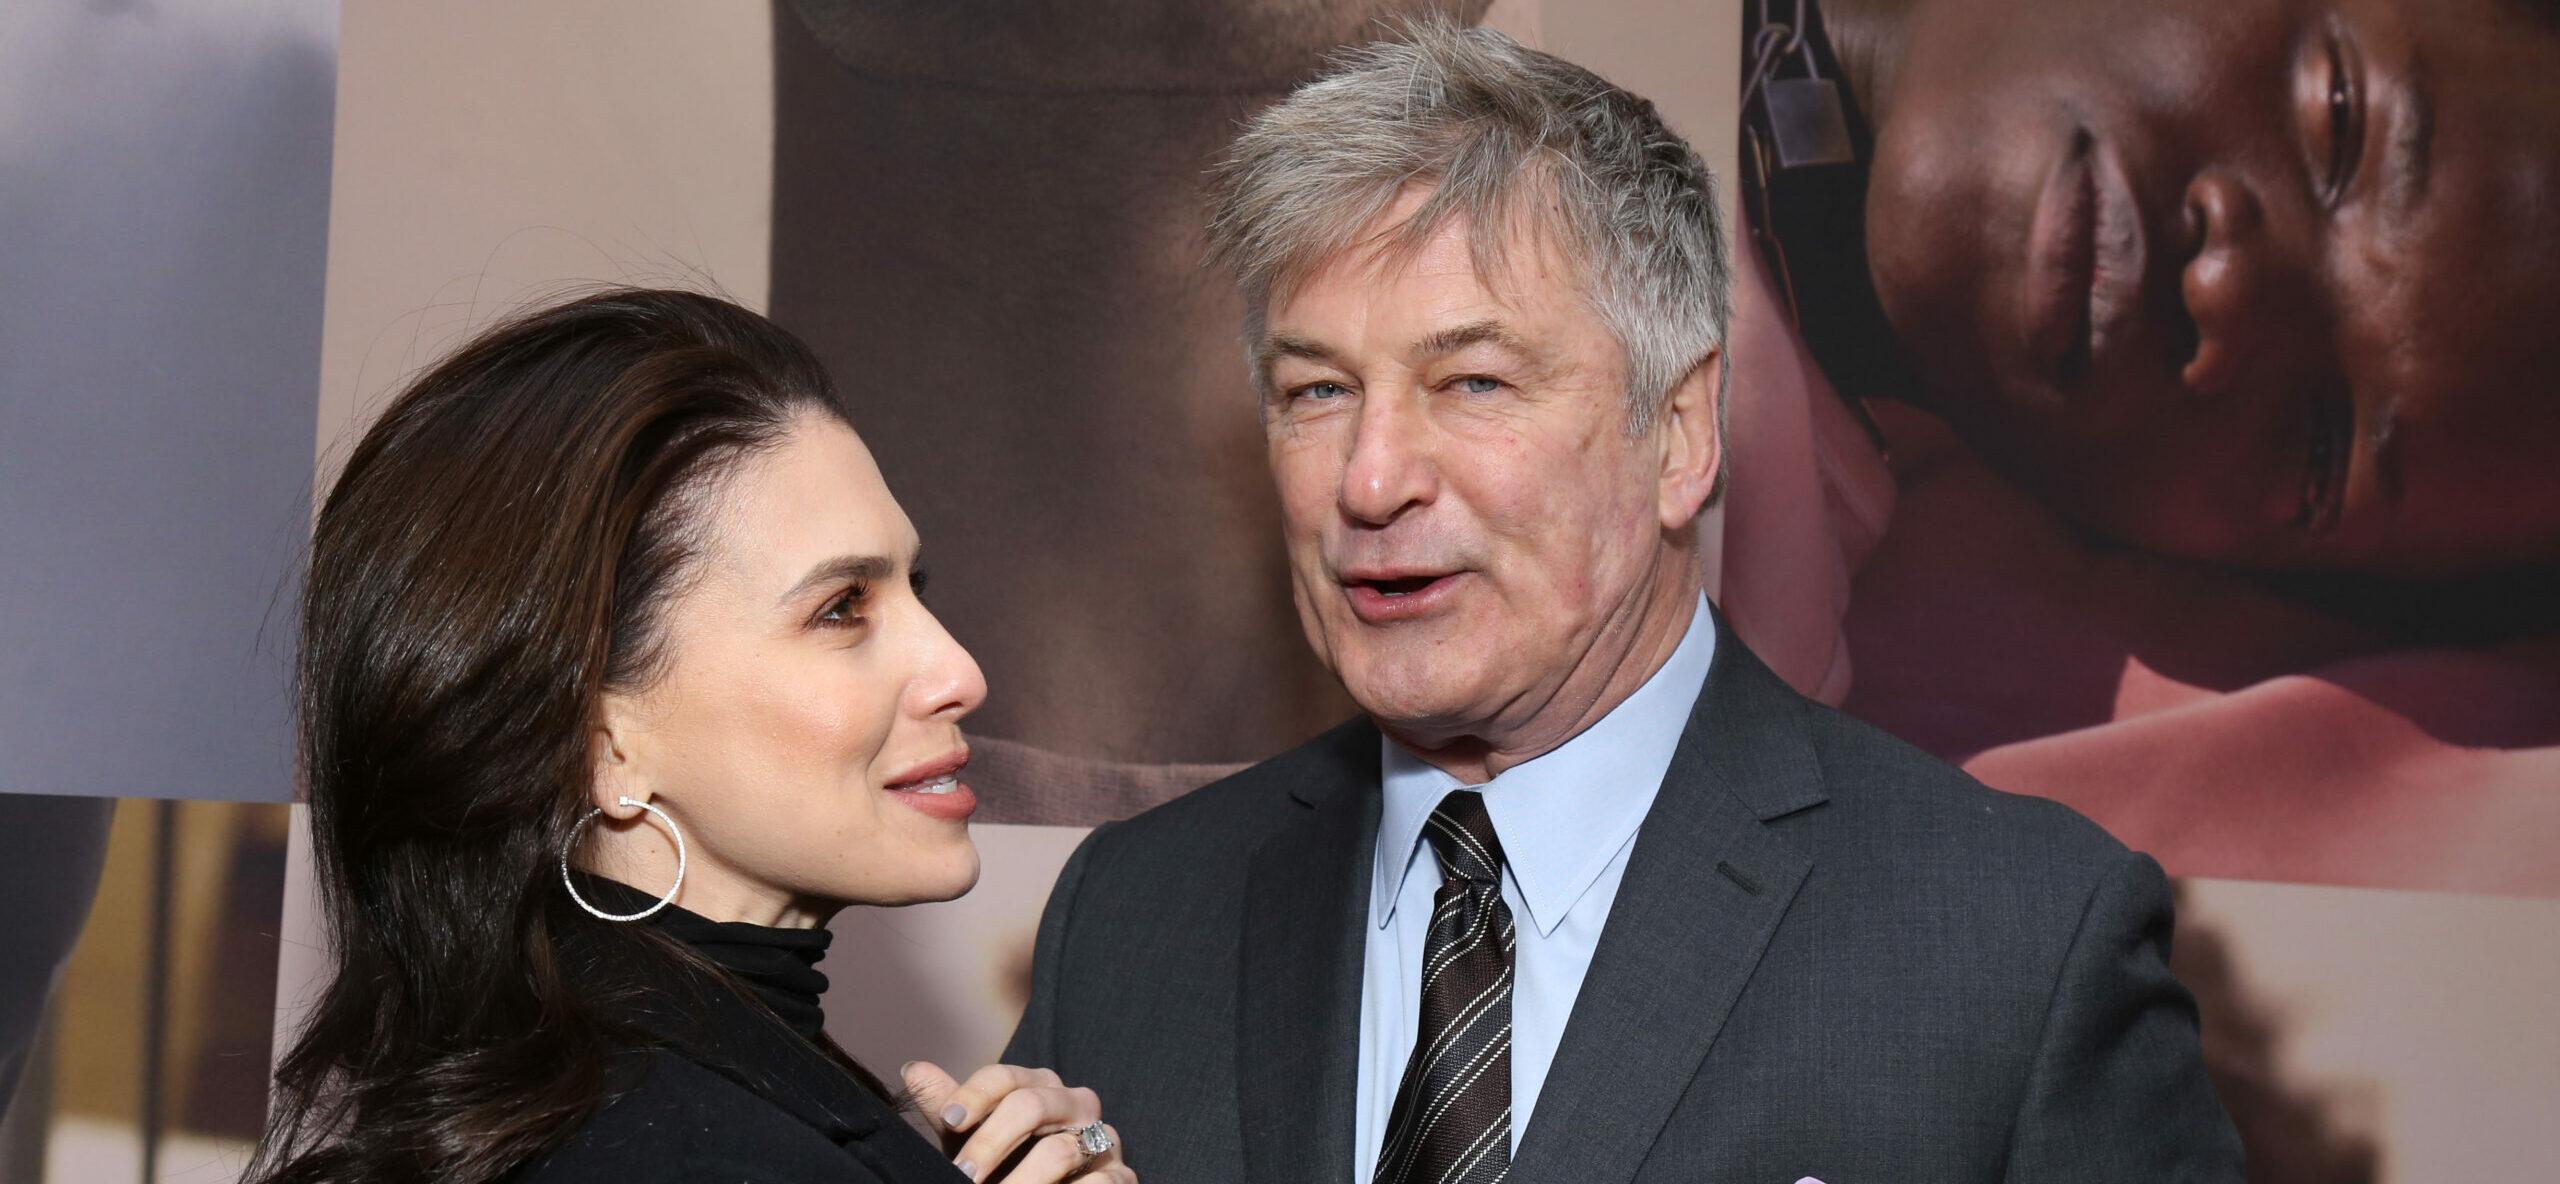 Hilaria Baldwin Explains Why Alec Baldwin Picked Up Cat Poop With His Bare Hands